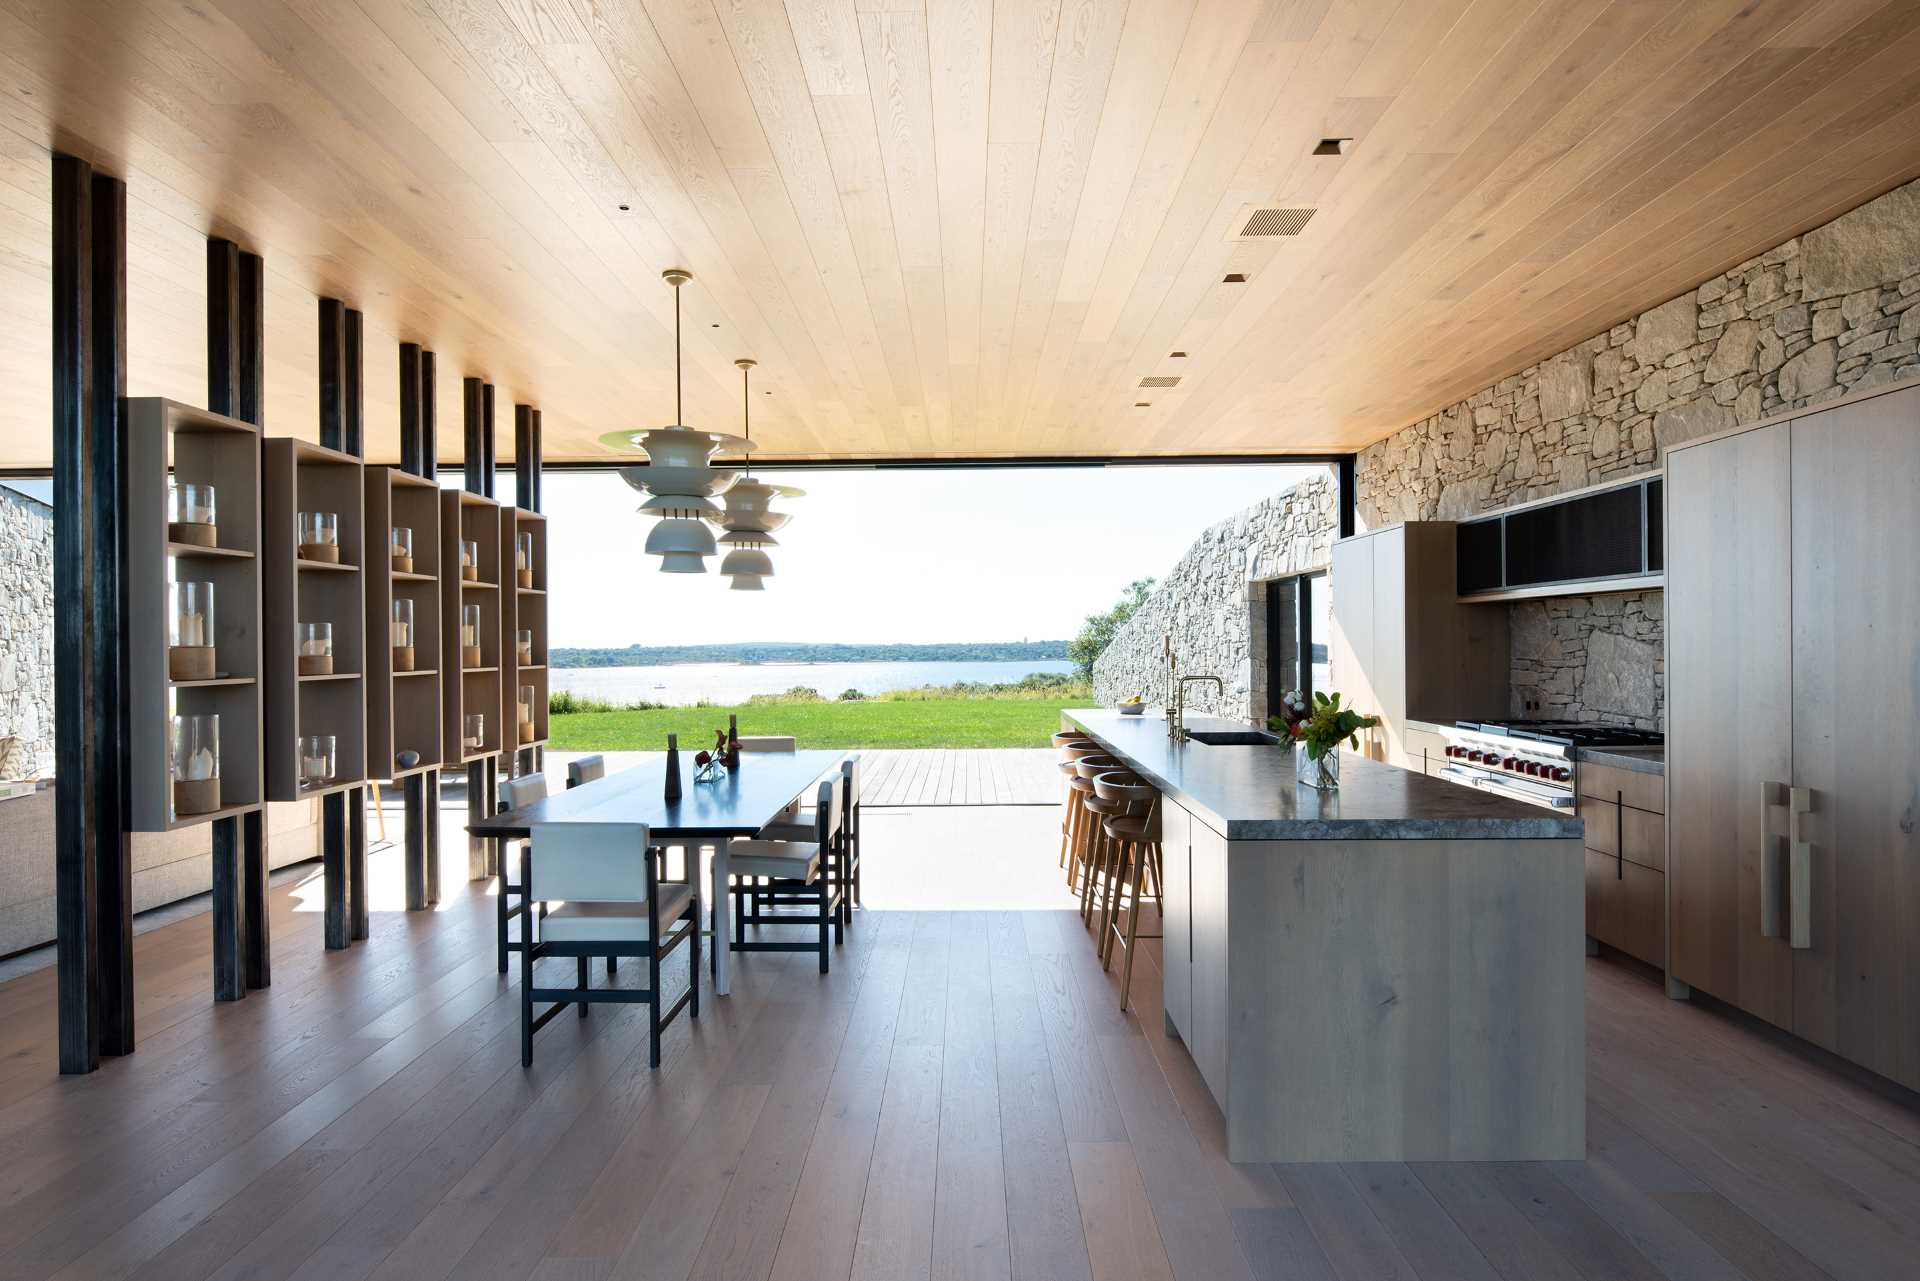 A modern kitchen with a stone wall that travels from the interior to the exterior of the home.